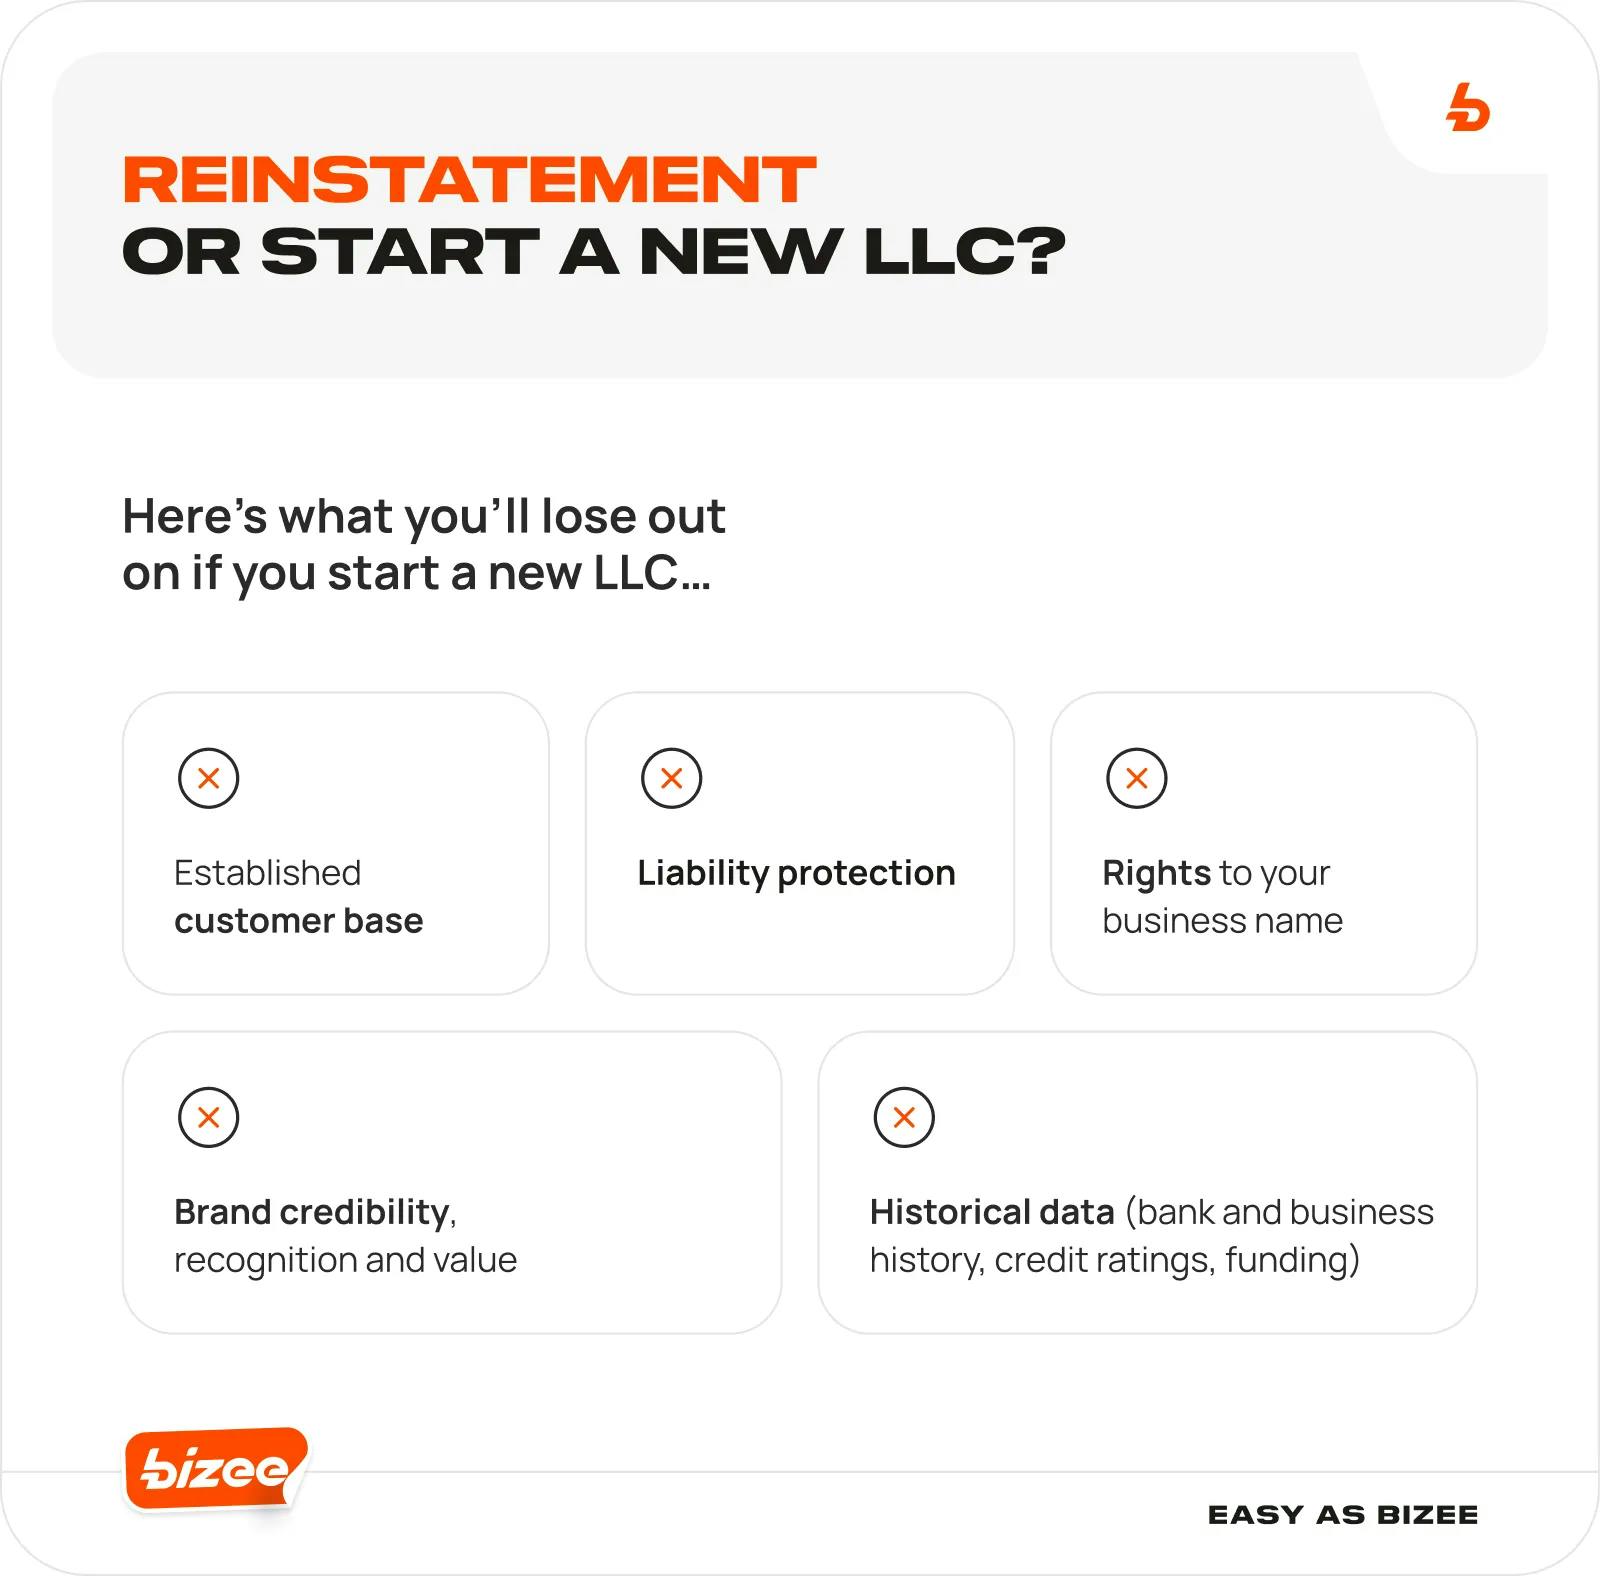 Reinstatement or starting a new business - infographic